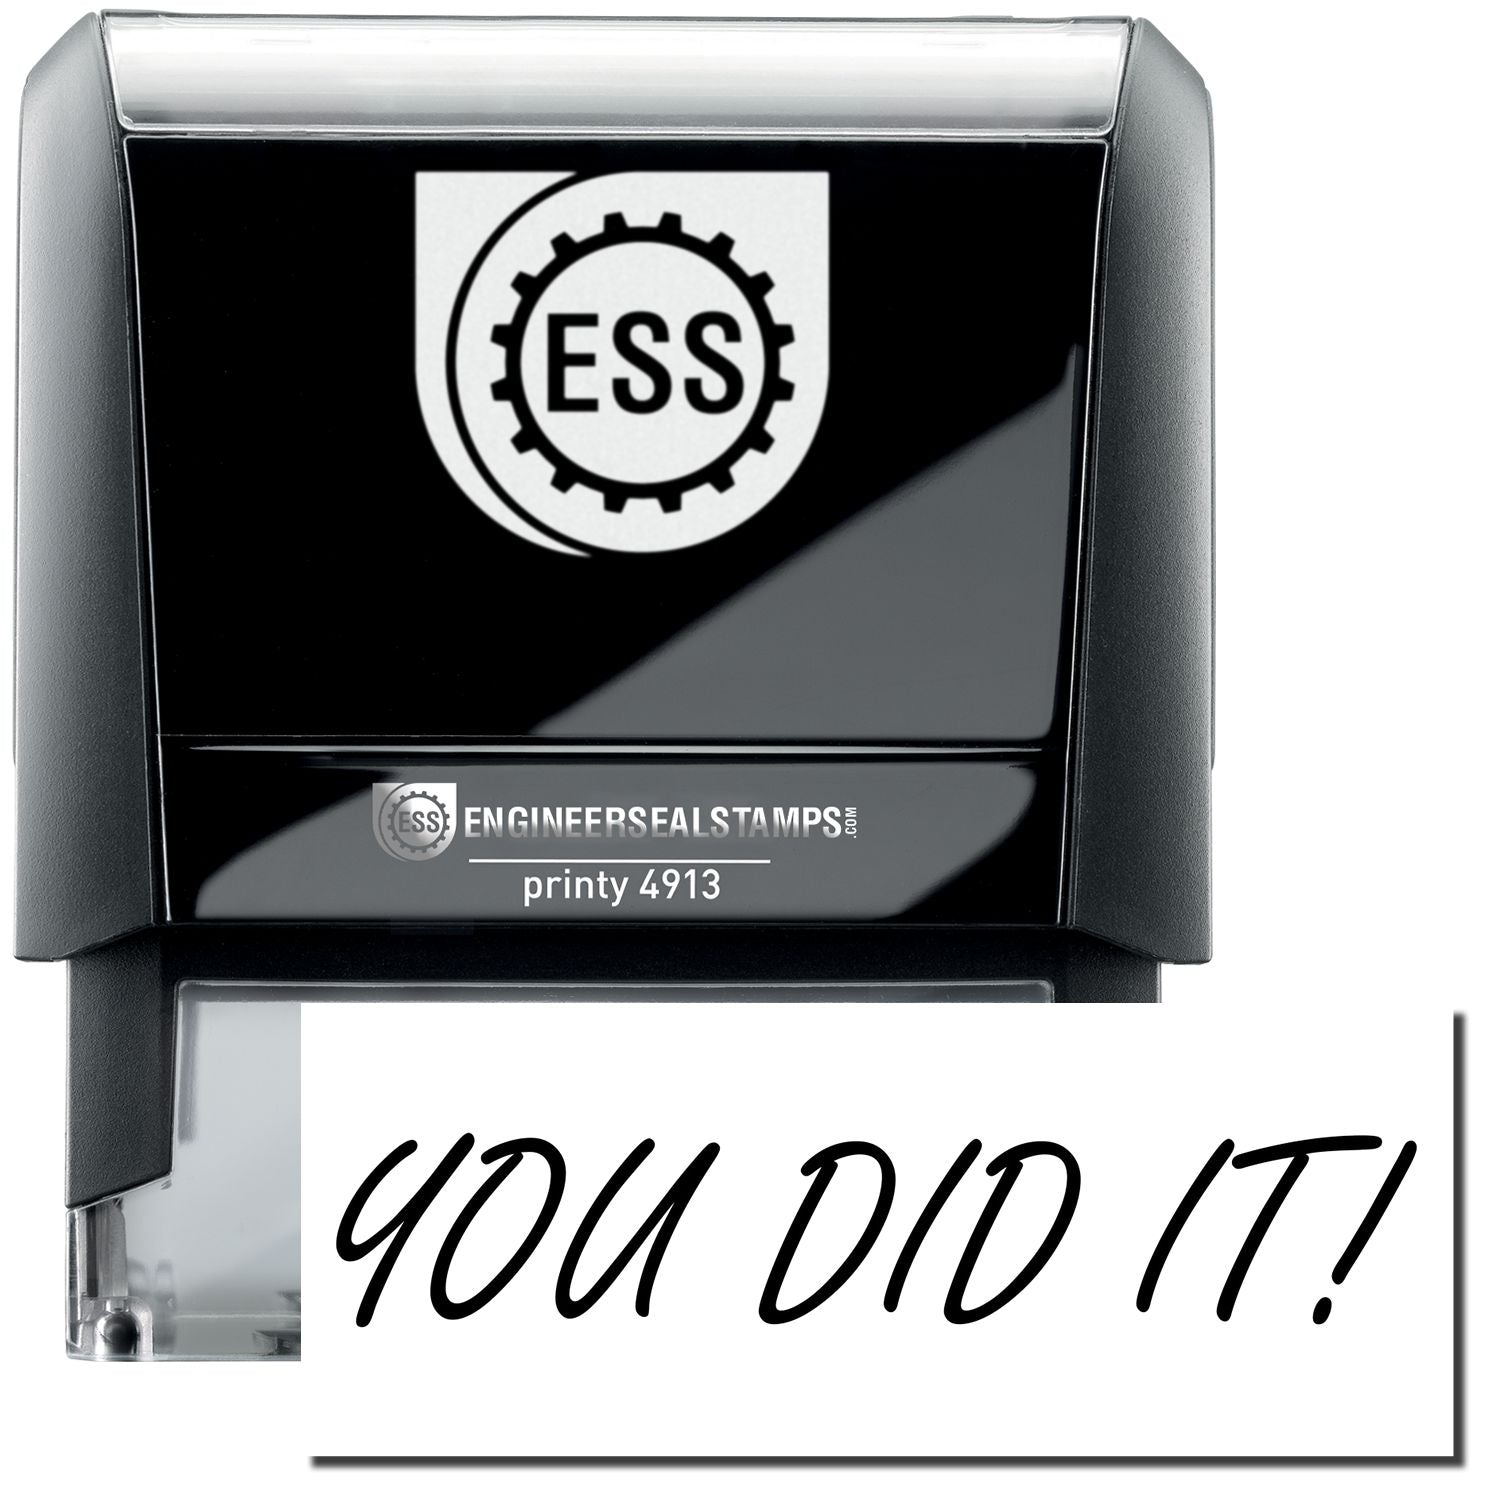 A self-inking stamp with a stamped image showing how the text "YOU DID IT!" in a large cursive font is displayed by it.